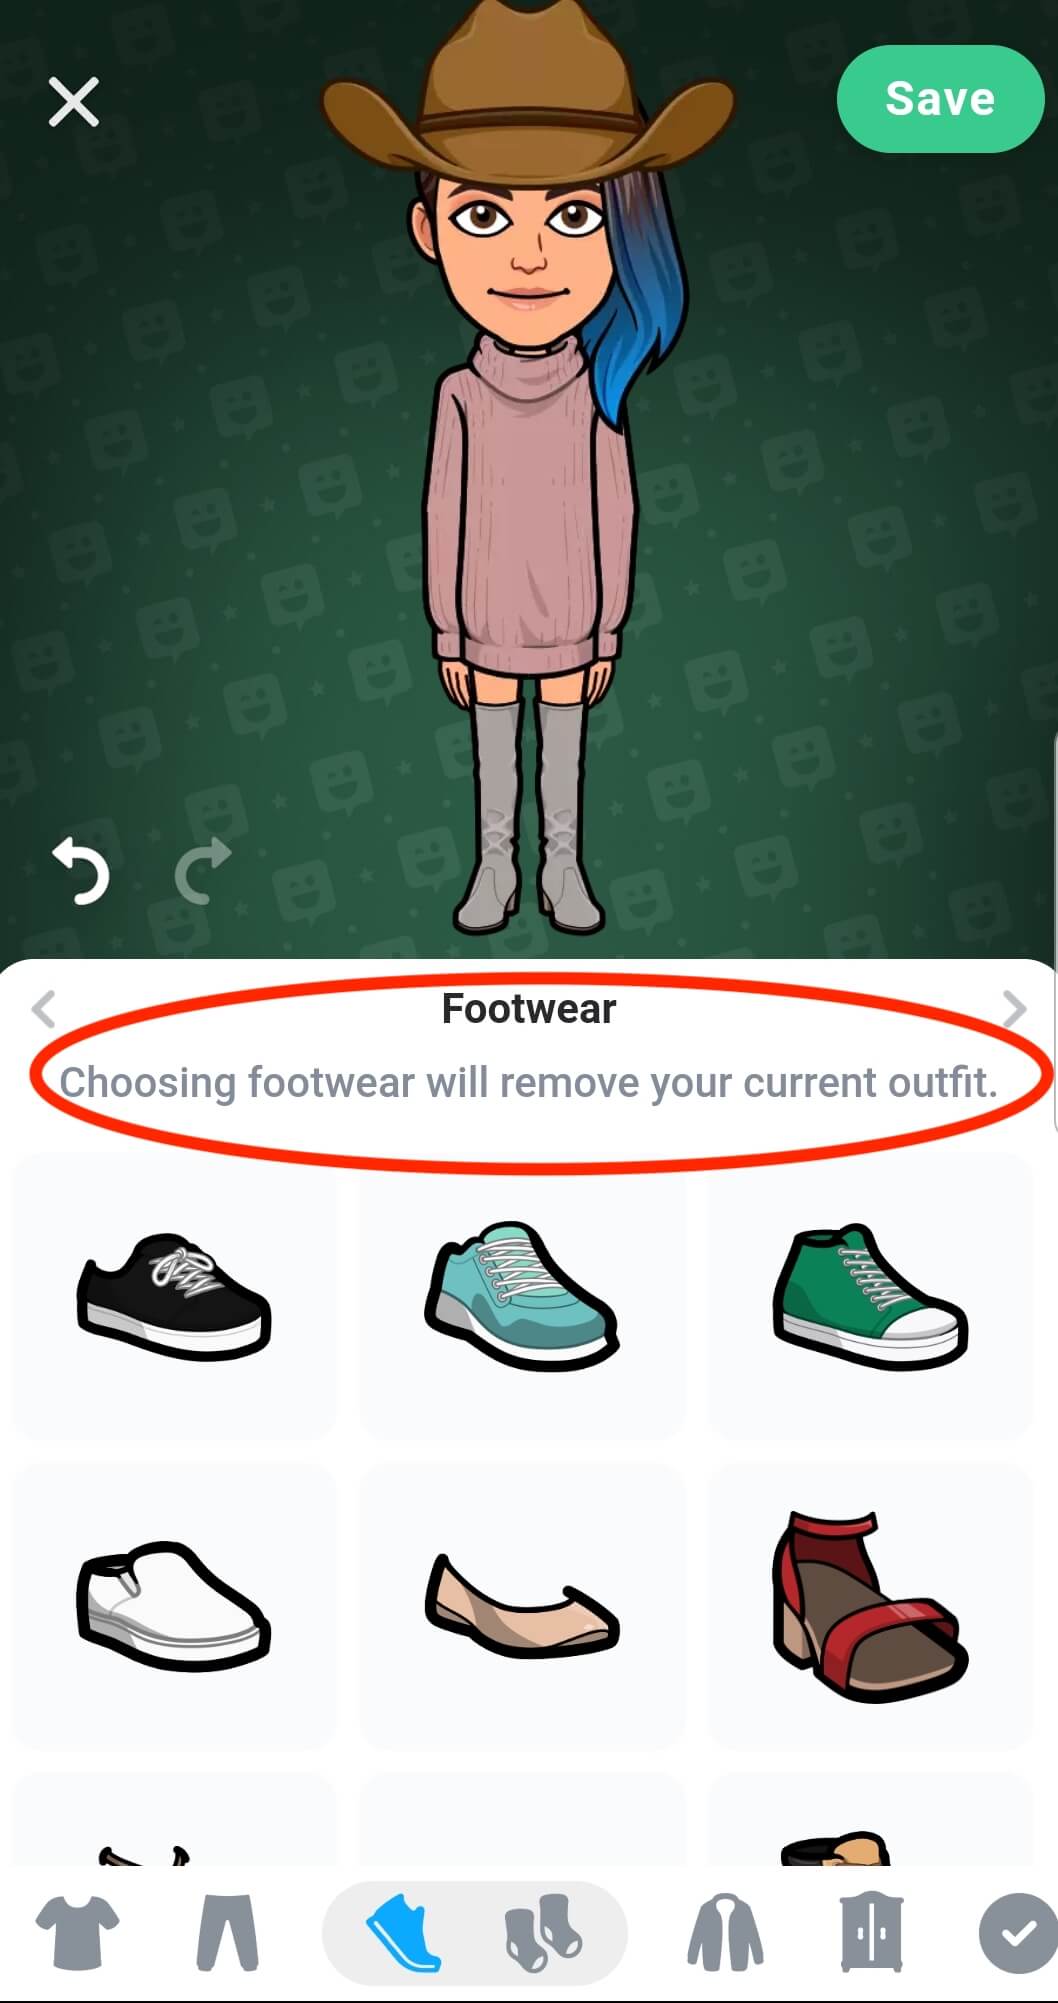 avatar appears on the top with an outfit that is not customizable. Below is a warning, Choosing a customizable article will remove your current outfit.